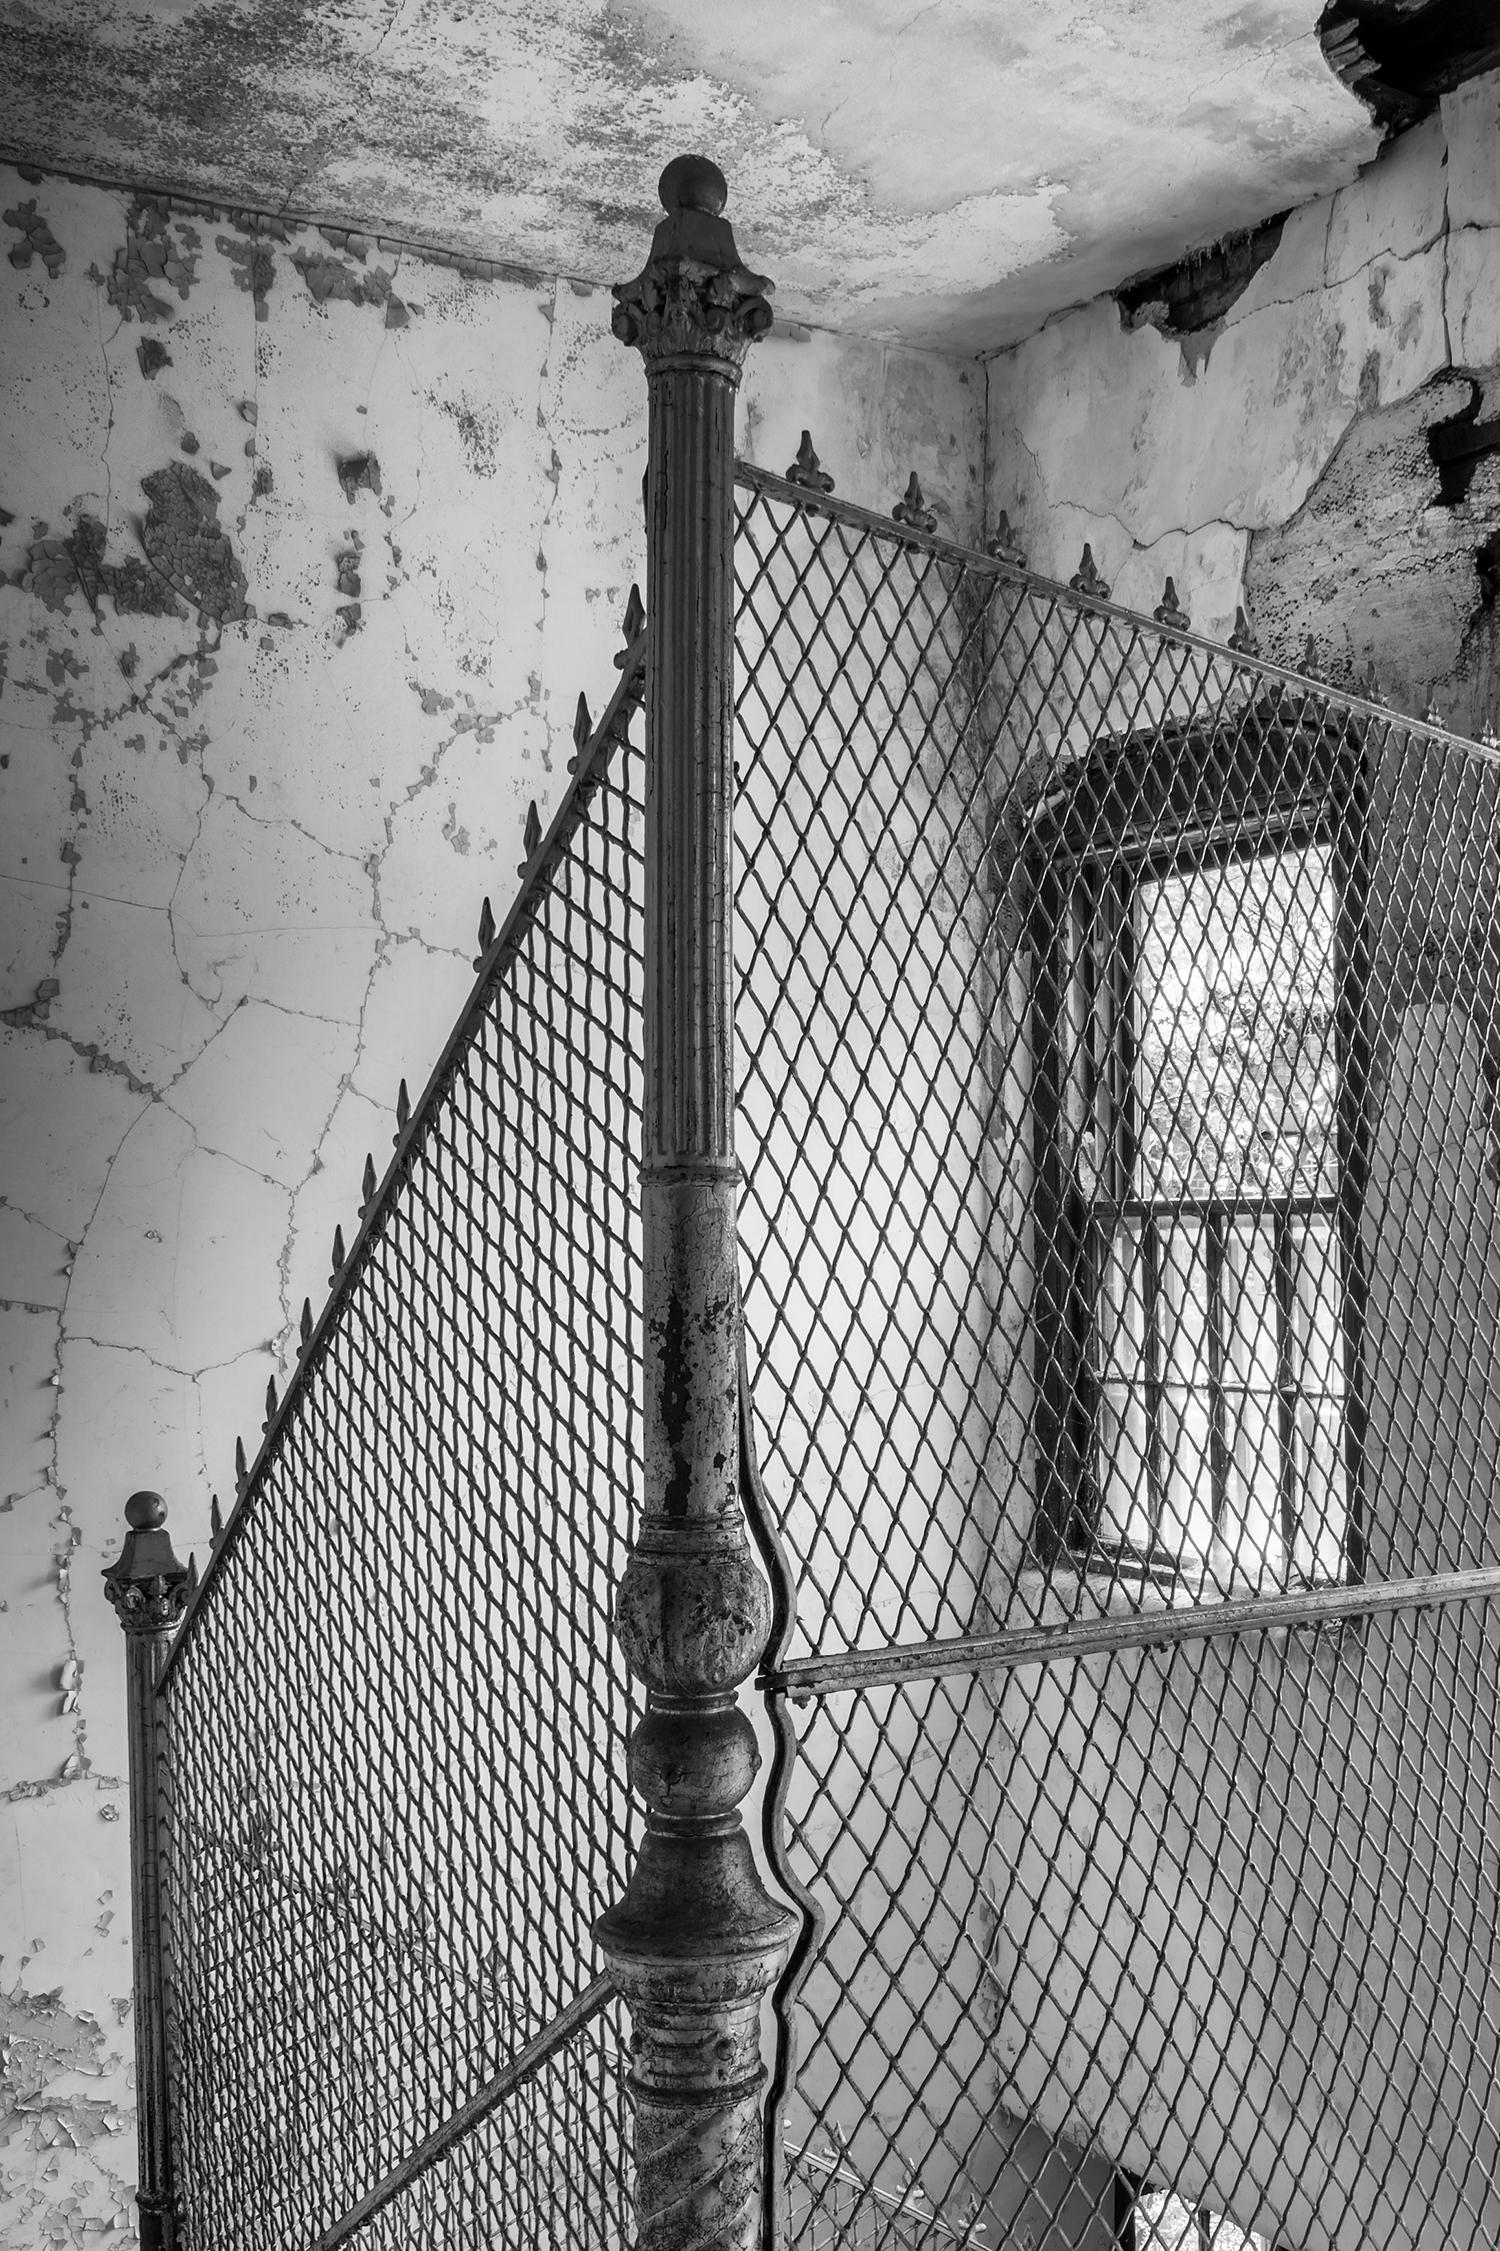 Rebecca Skinner’s “Escape” is a 24 x 16 inch black and white print of protective fencing around a stairwell at an abandoned hospital. With satin finish, the image is infused directly into metal making it waterproof and easy to clean. This frameless